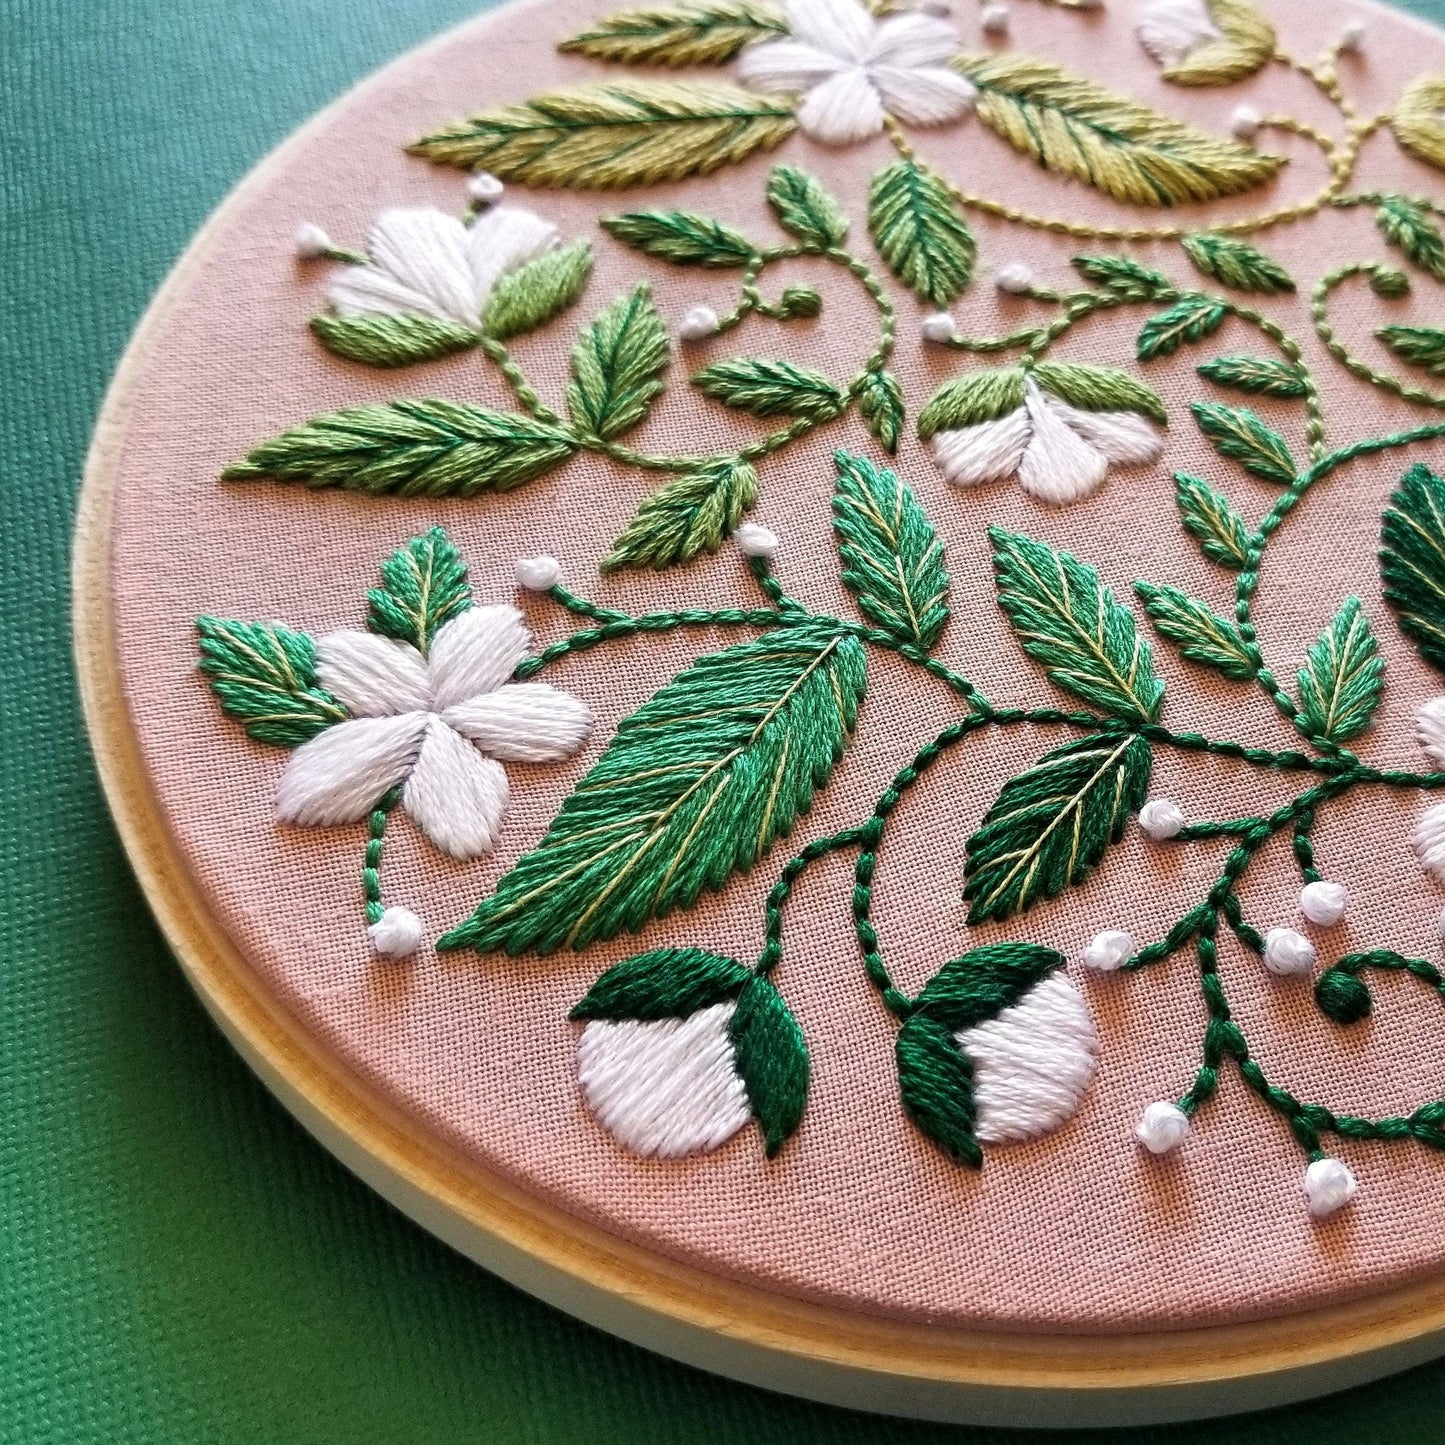 Jessica Long Embroidery - Blissful Blooms Beginner Embroidery Kit